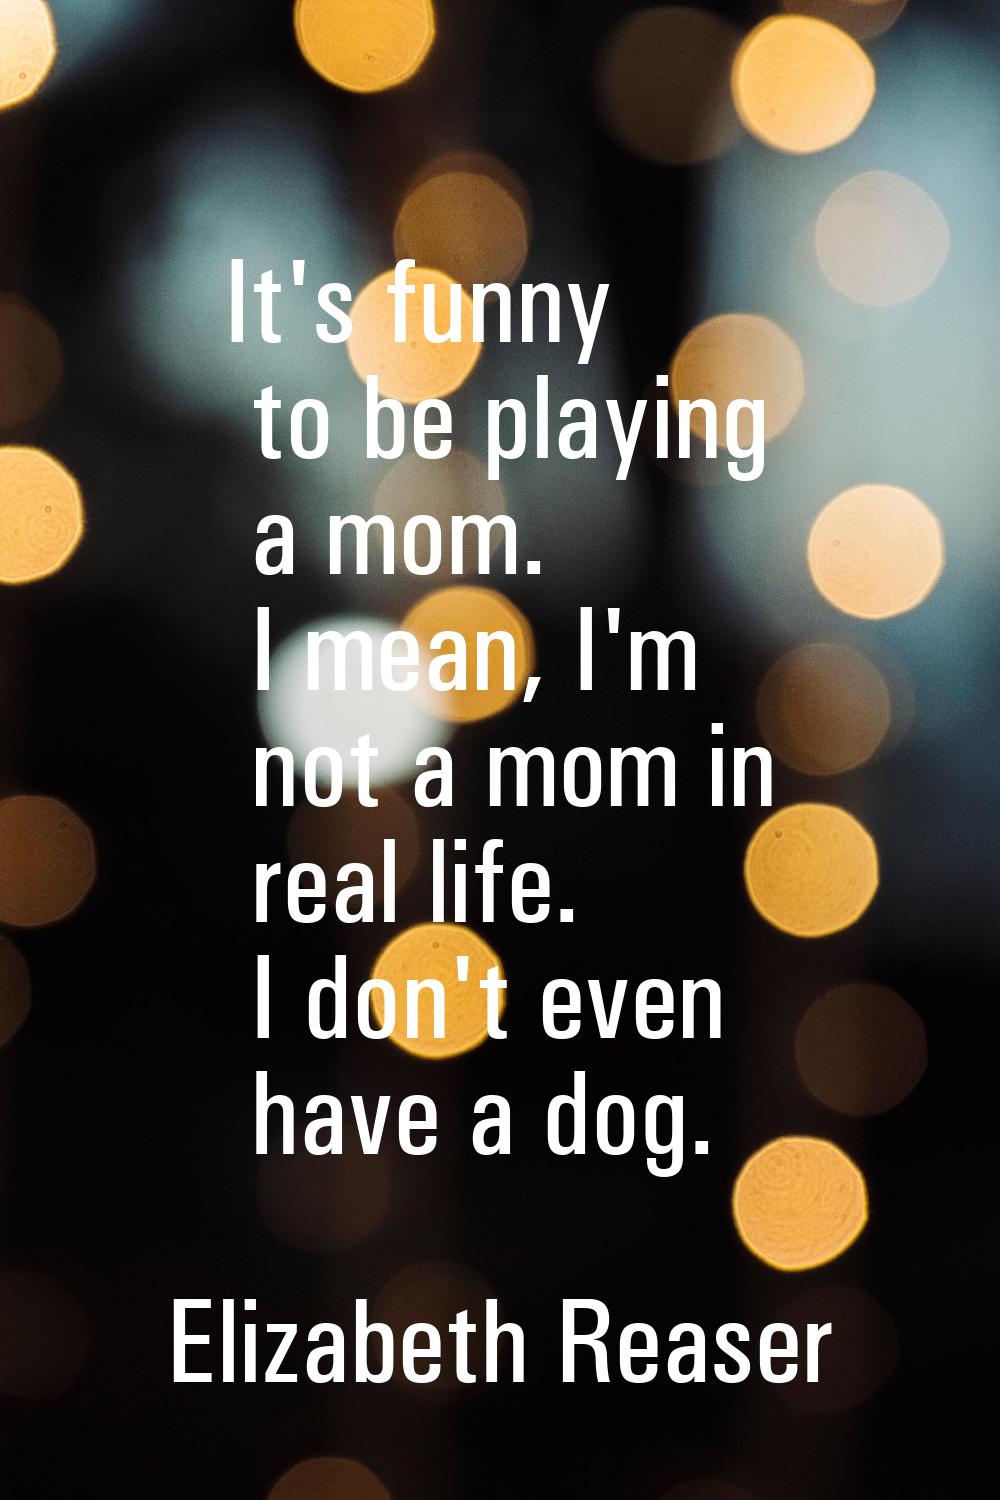 It's funny to be playing a mom. I mean, I'm not a mom in real life. I don't even have a dog.